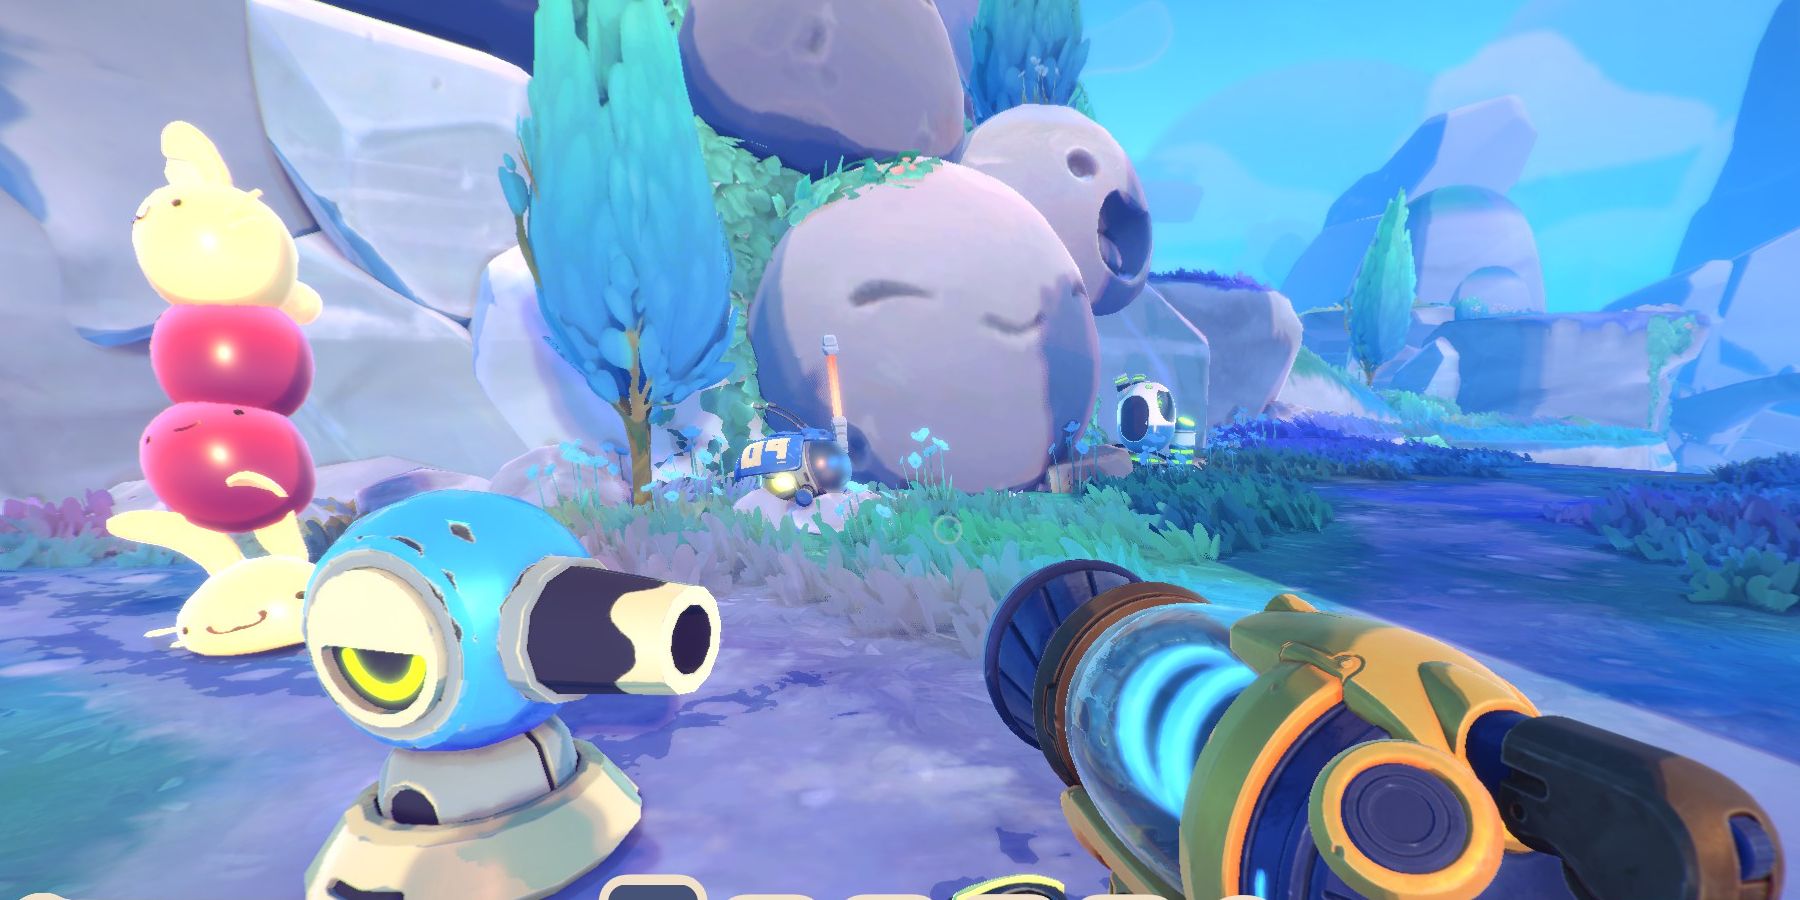 Slime Rancher 2 Gadgets, including Hydro Turret and Refinery Link